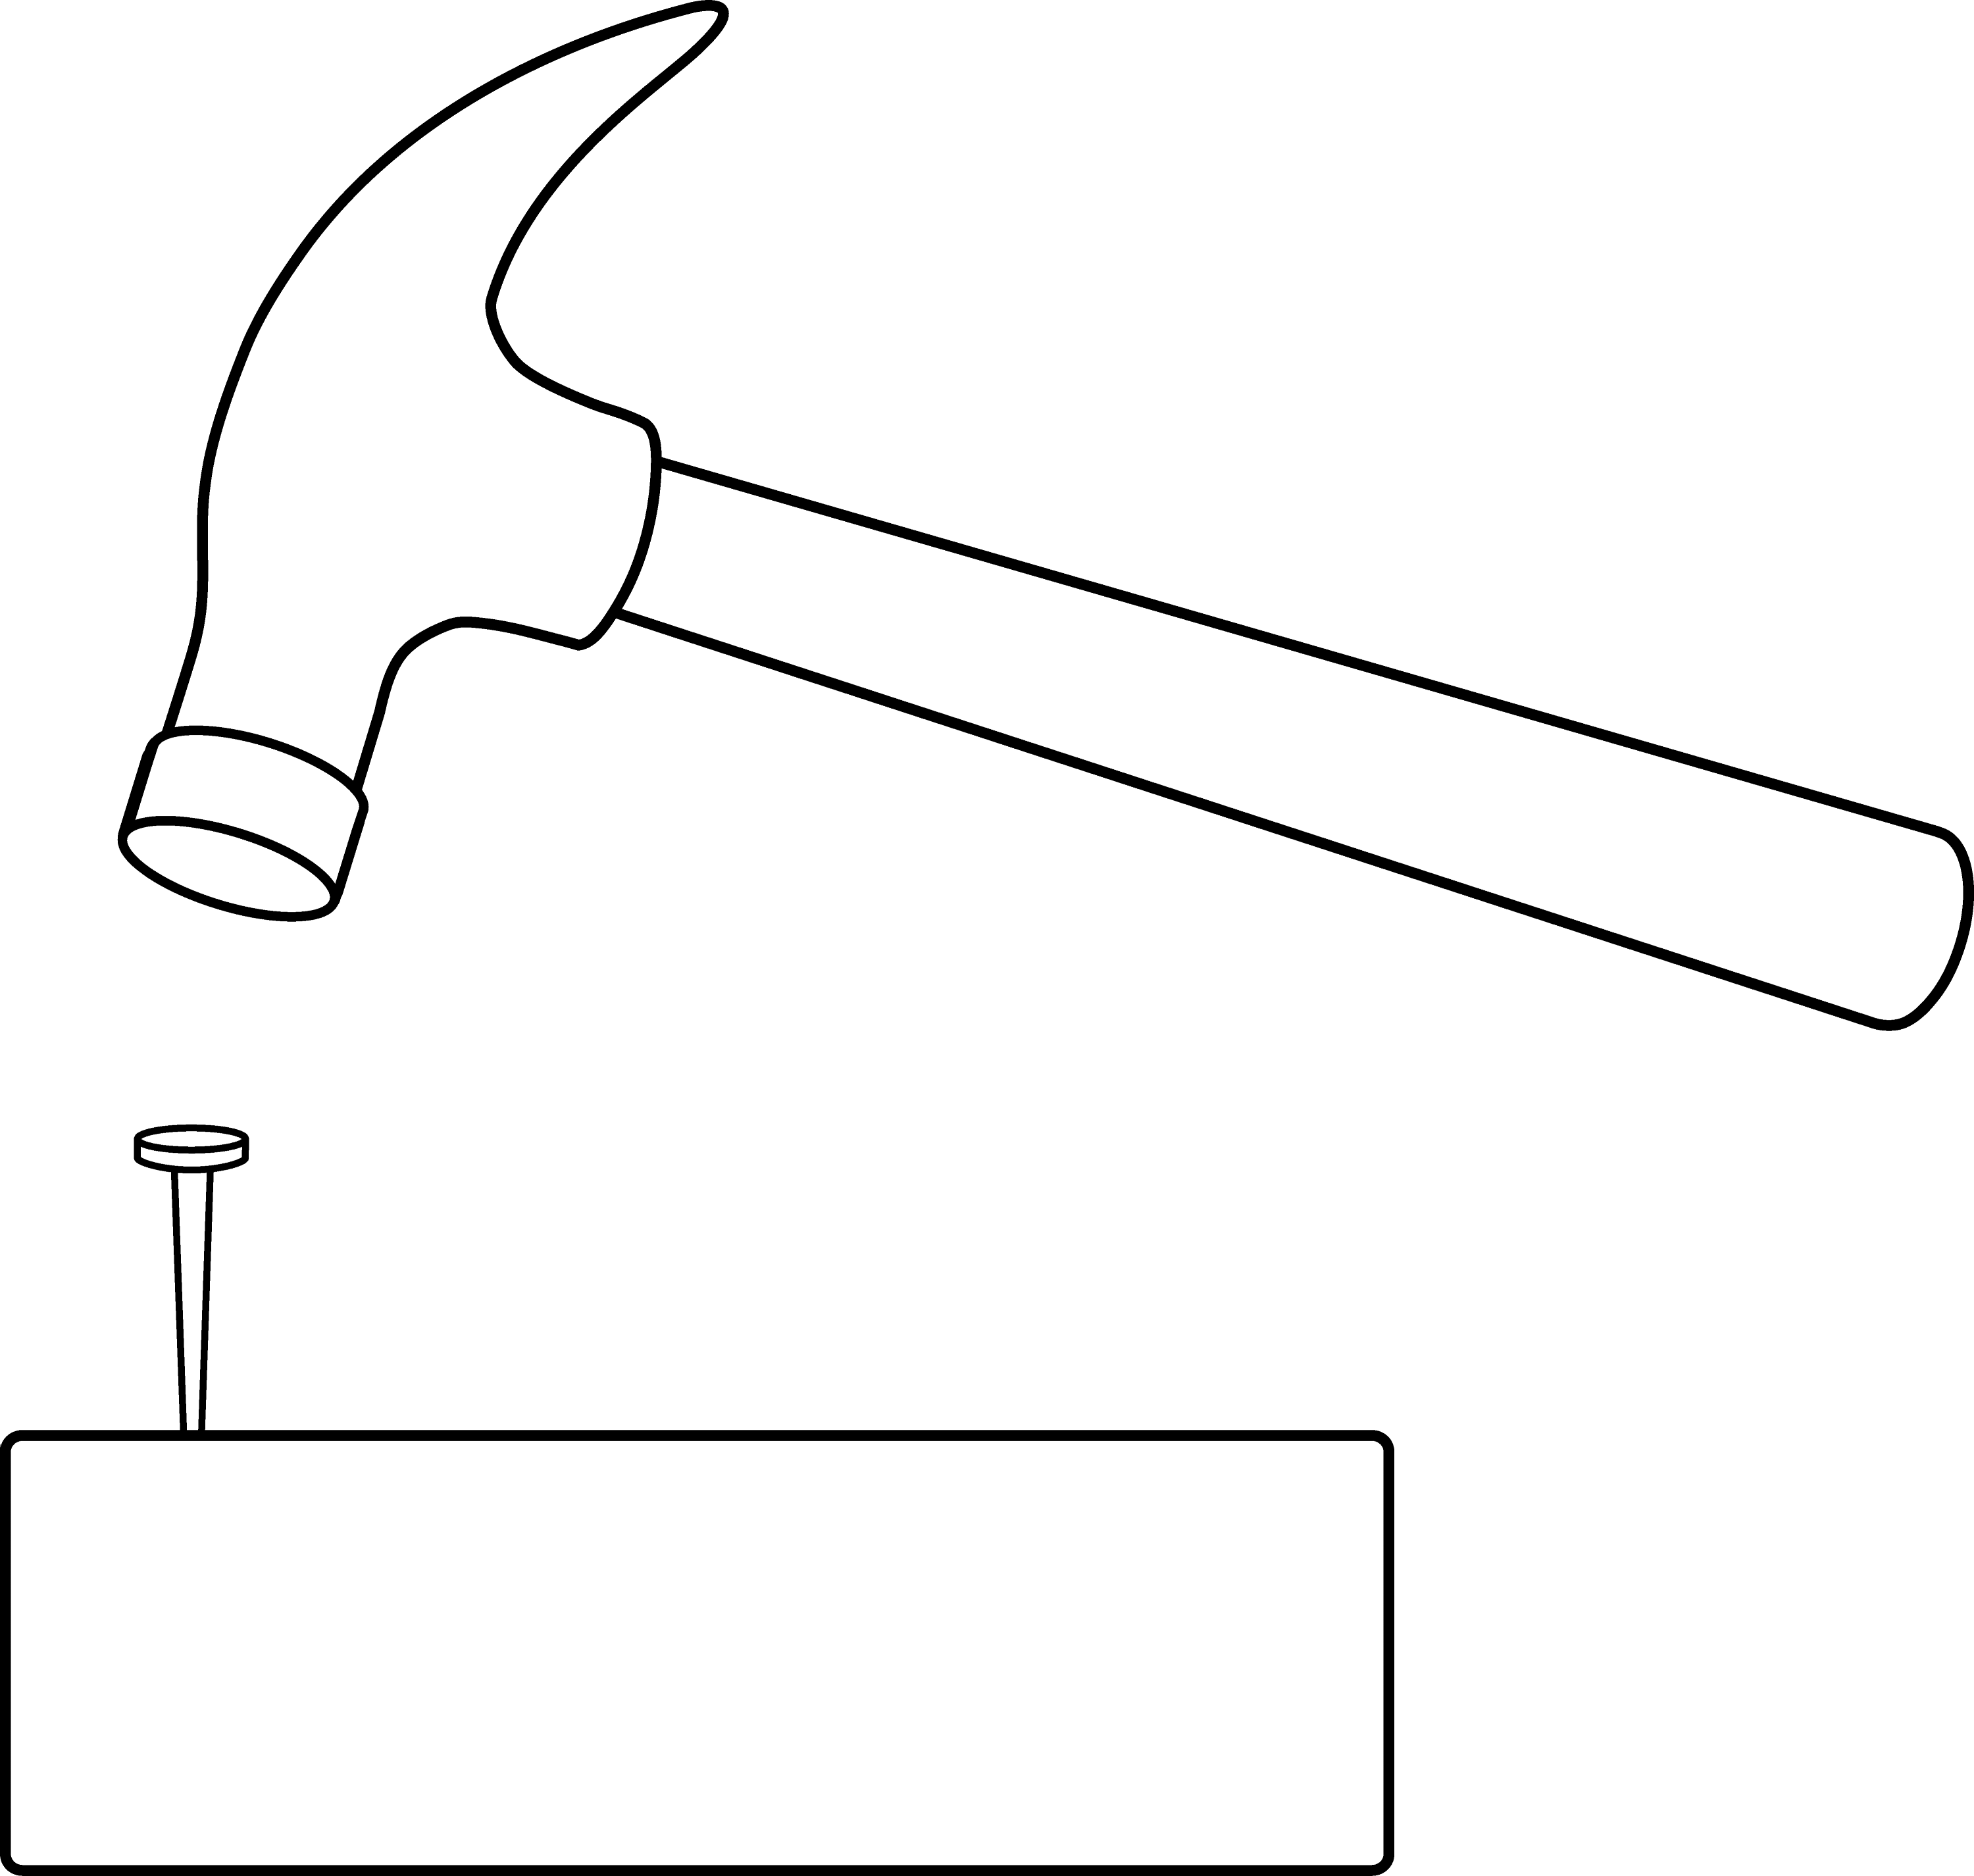 hammer and nails clipart - photo #17